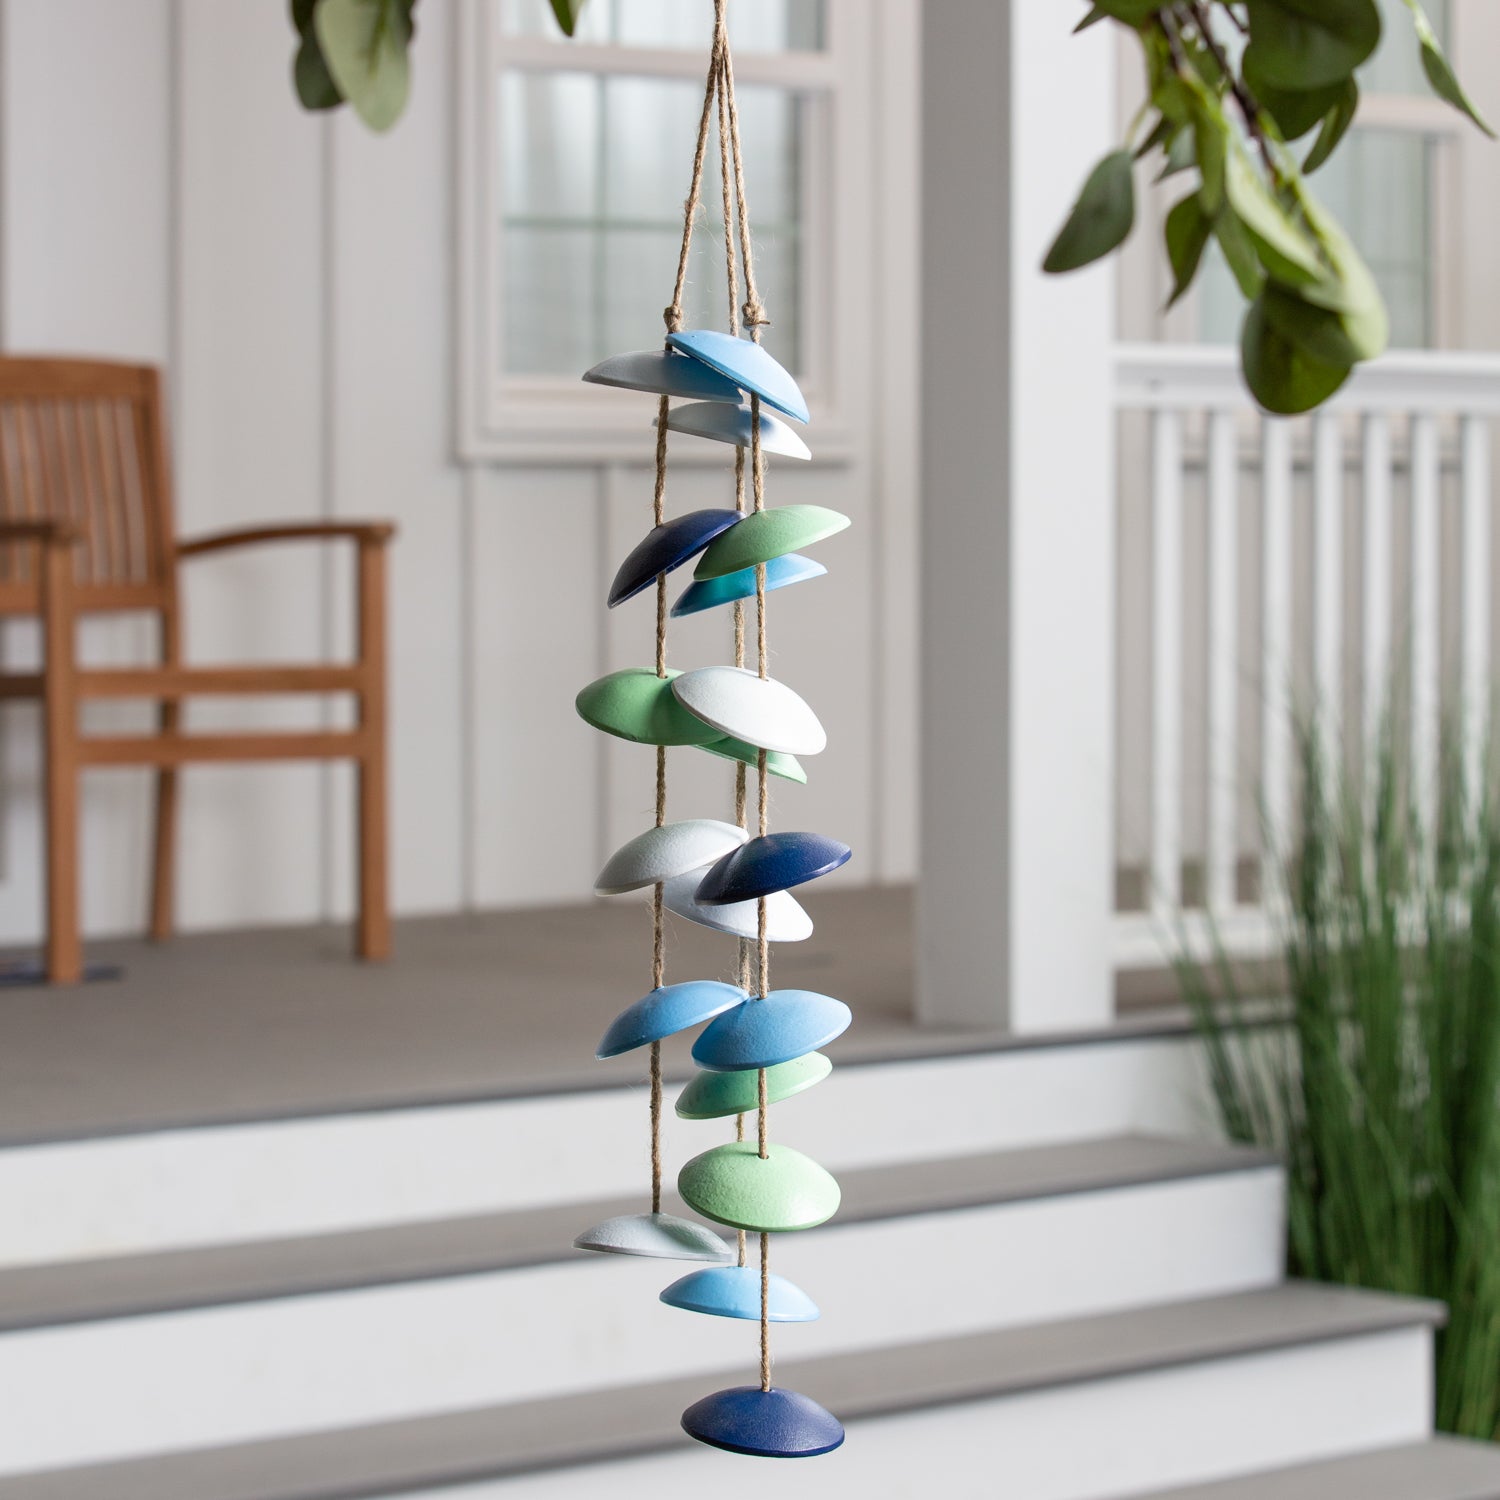 Multi Colored Wind Chime with Jute Rope, Cast Aluminum